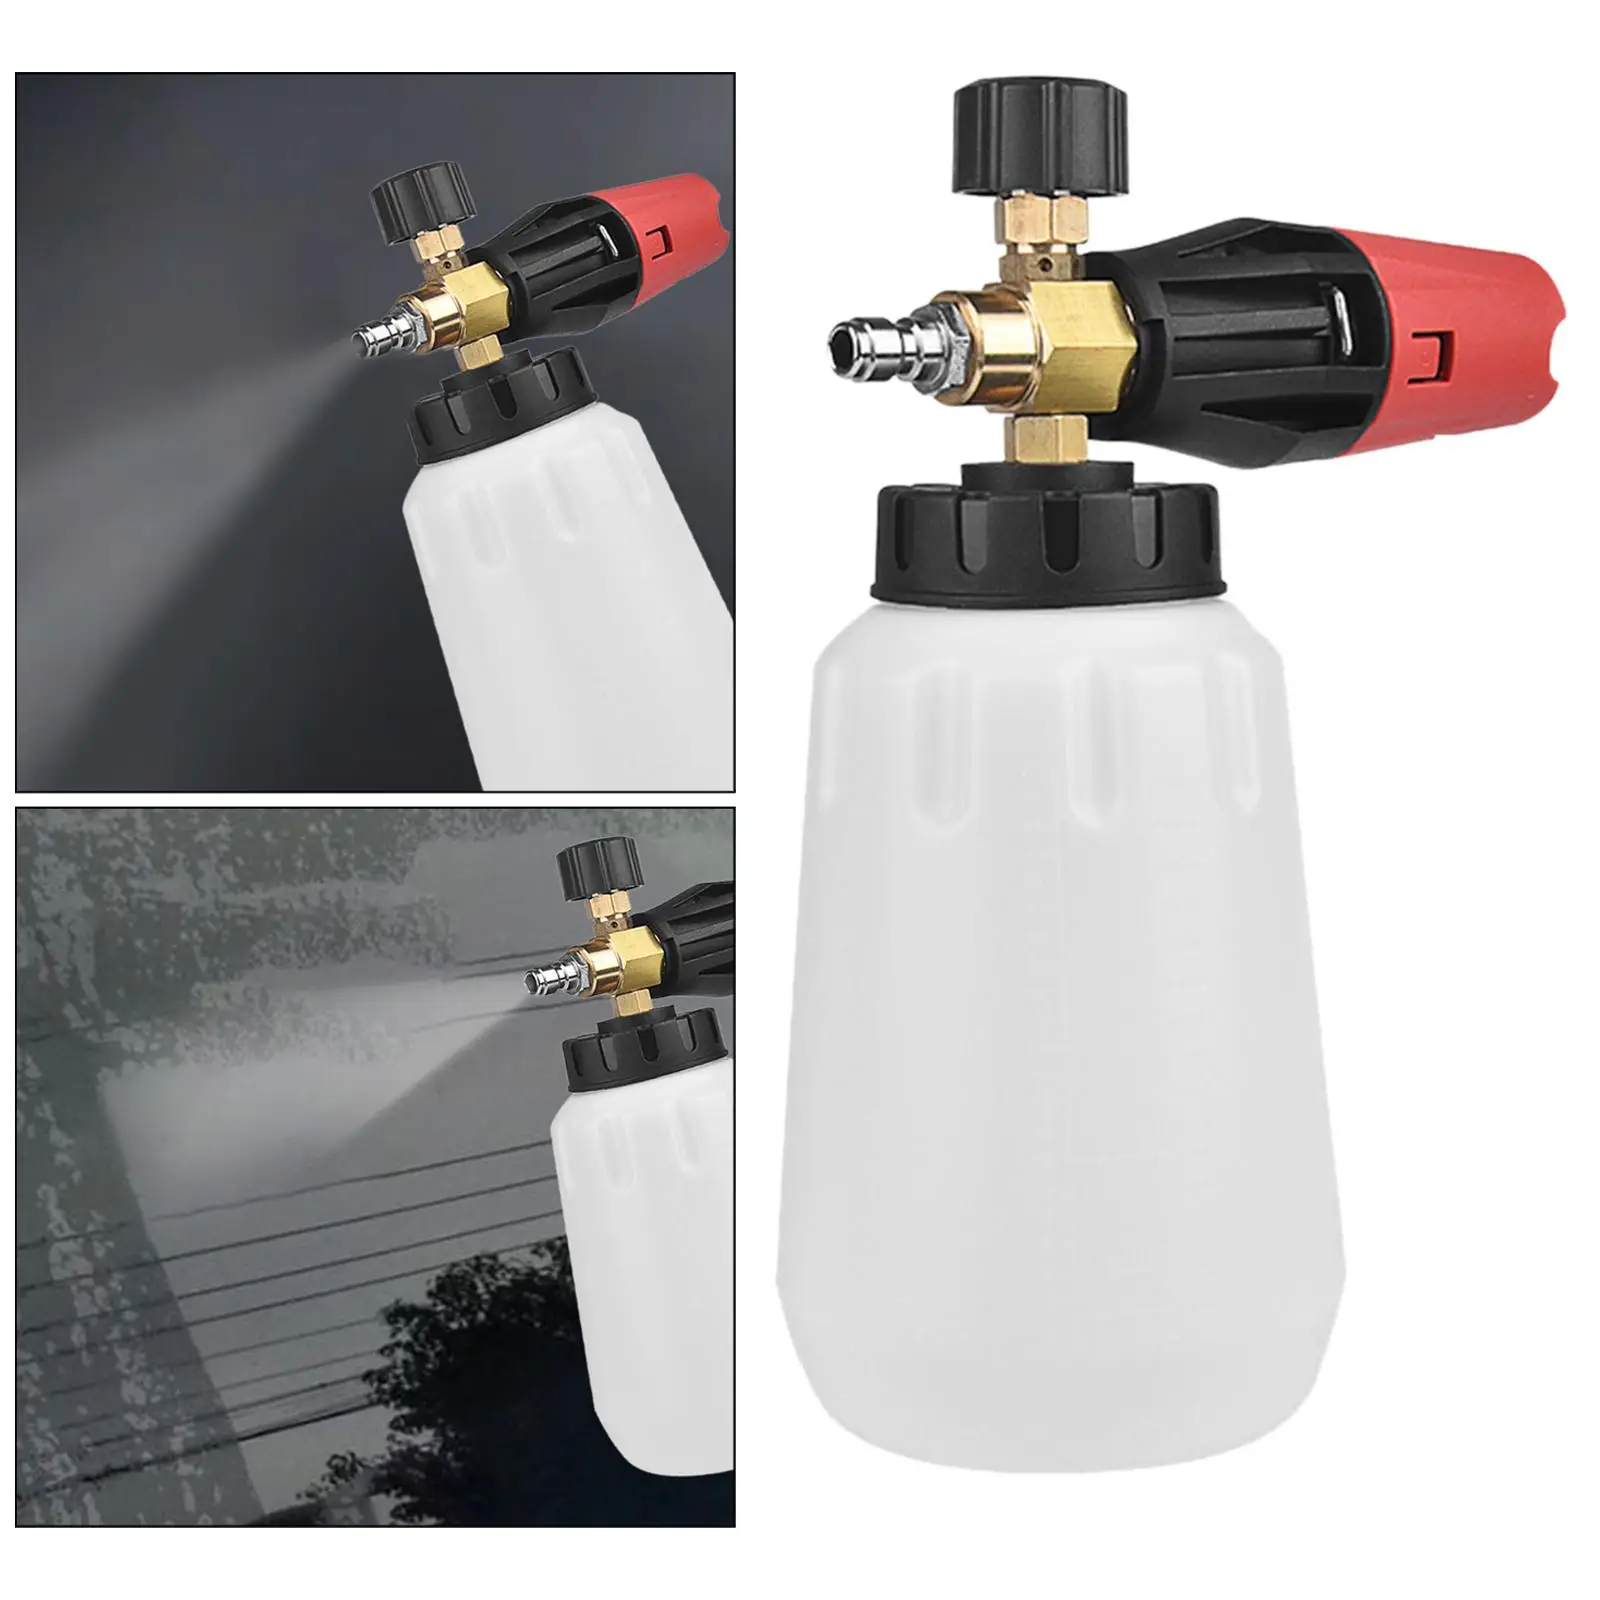 Foam Sprayer Foam Washing Pump Car Washer Bottle 1/4 inch Quick Connect Cleaning Tools for House Cleaning Automotive Detailing